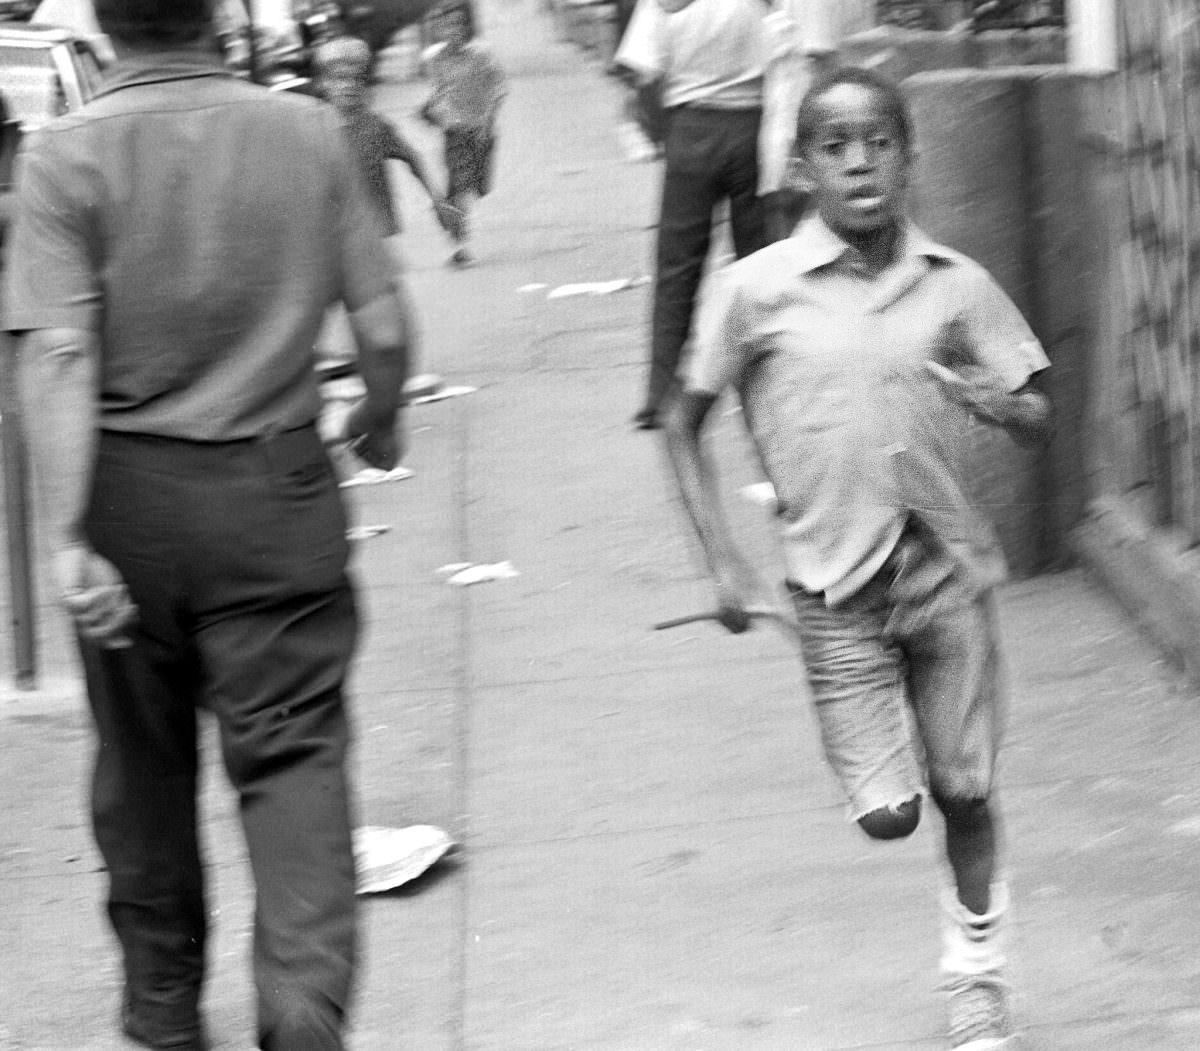 Jeffery, Fernando, And Orlando In A Block Race From 1St To 2Nd Avenue On 3Rd Street, 1974.